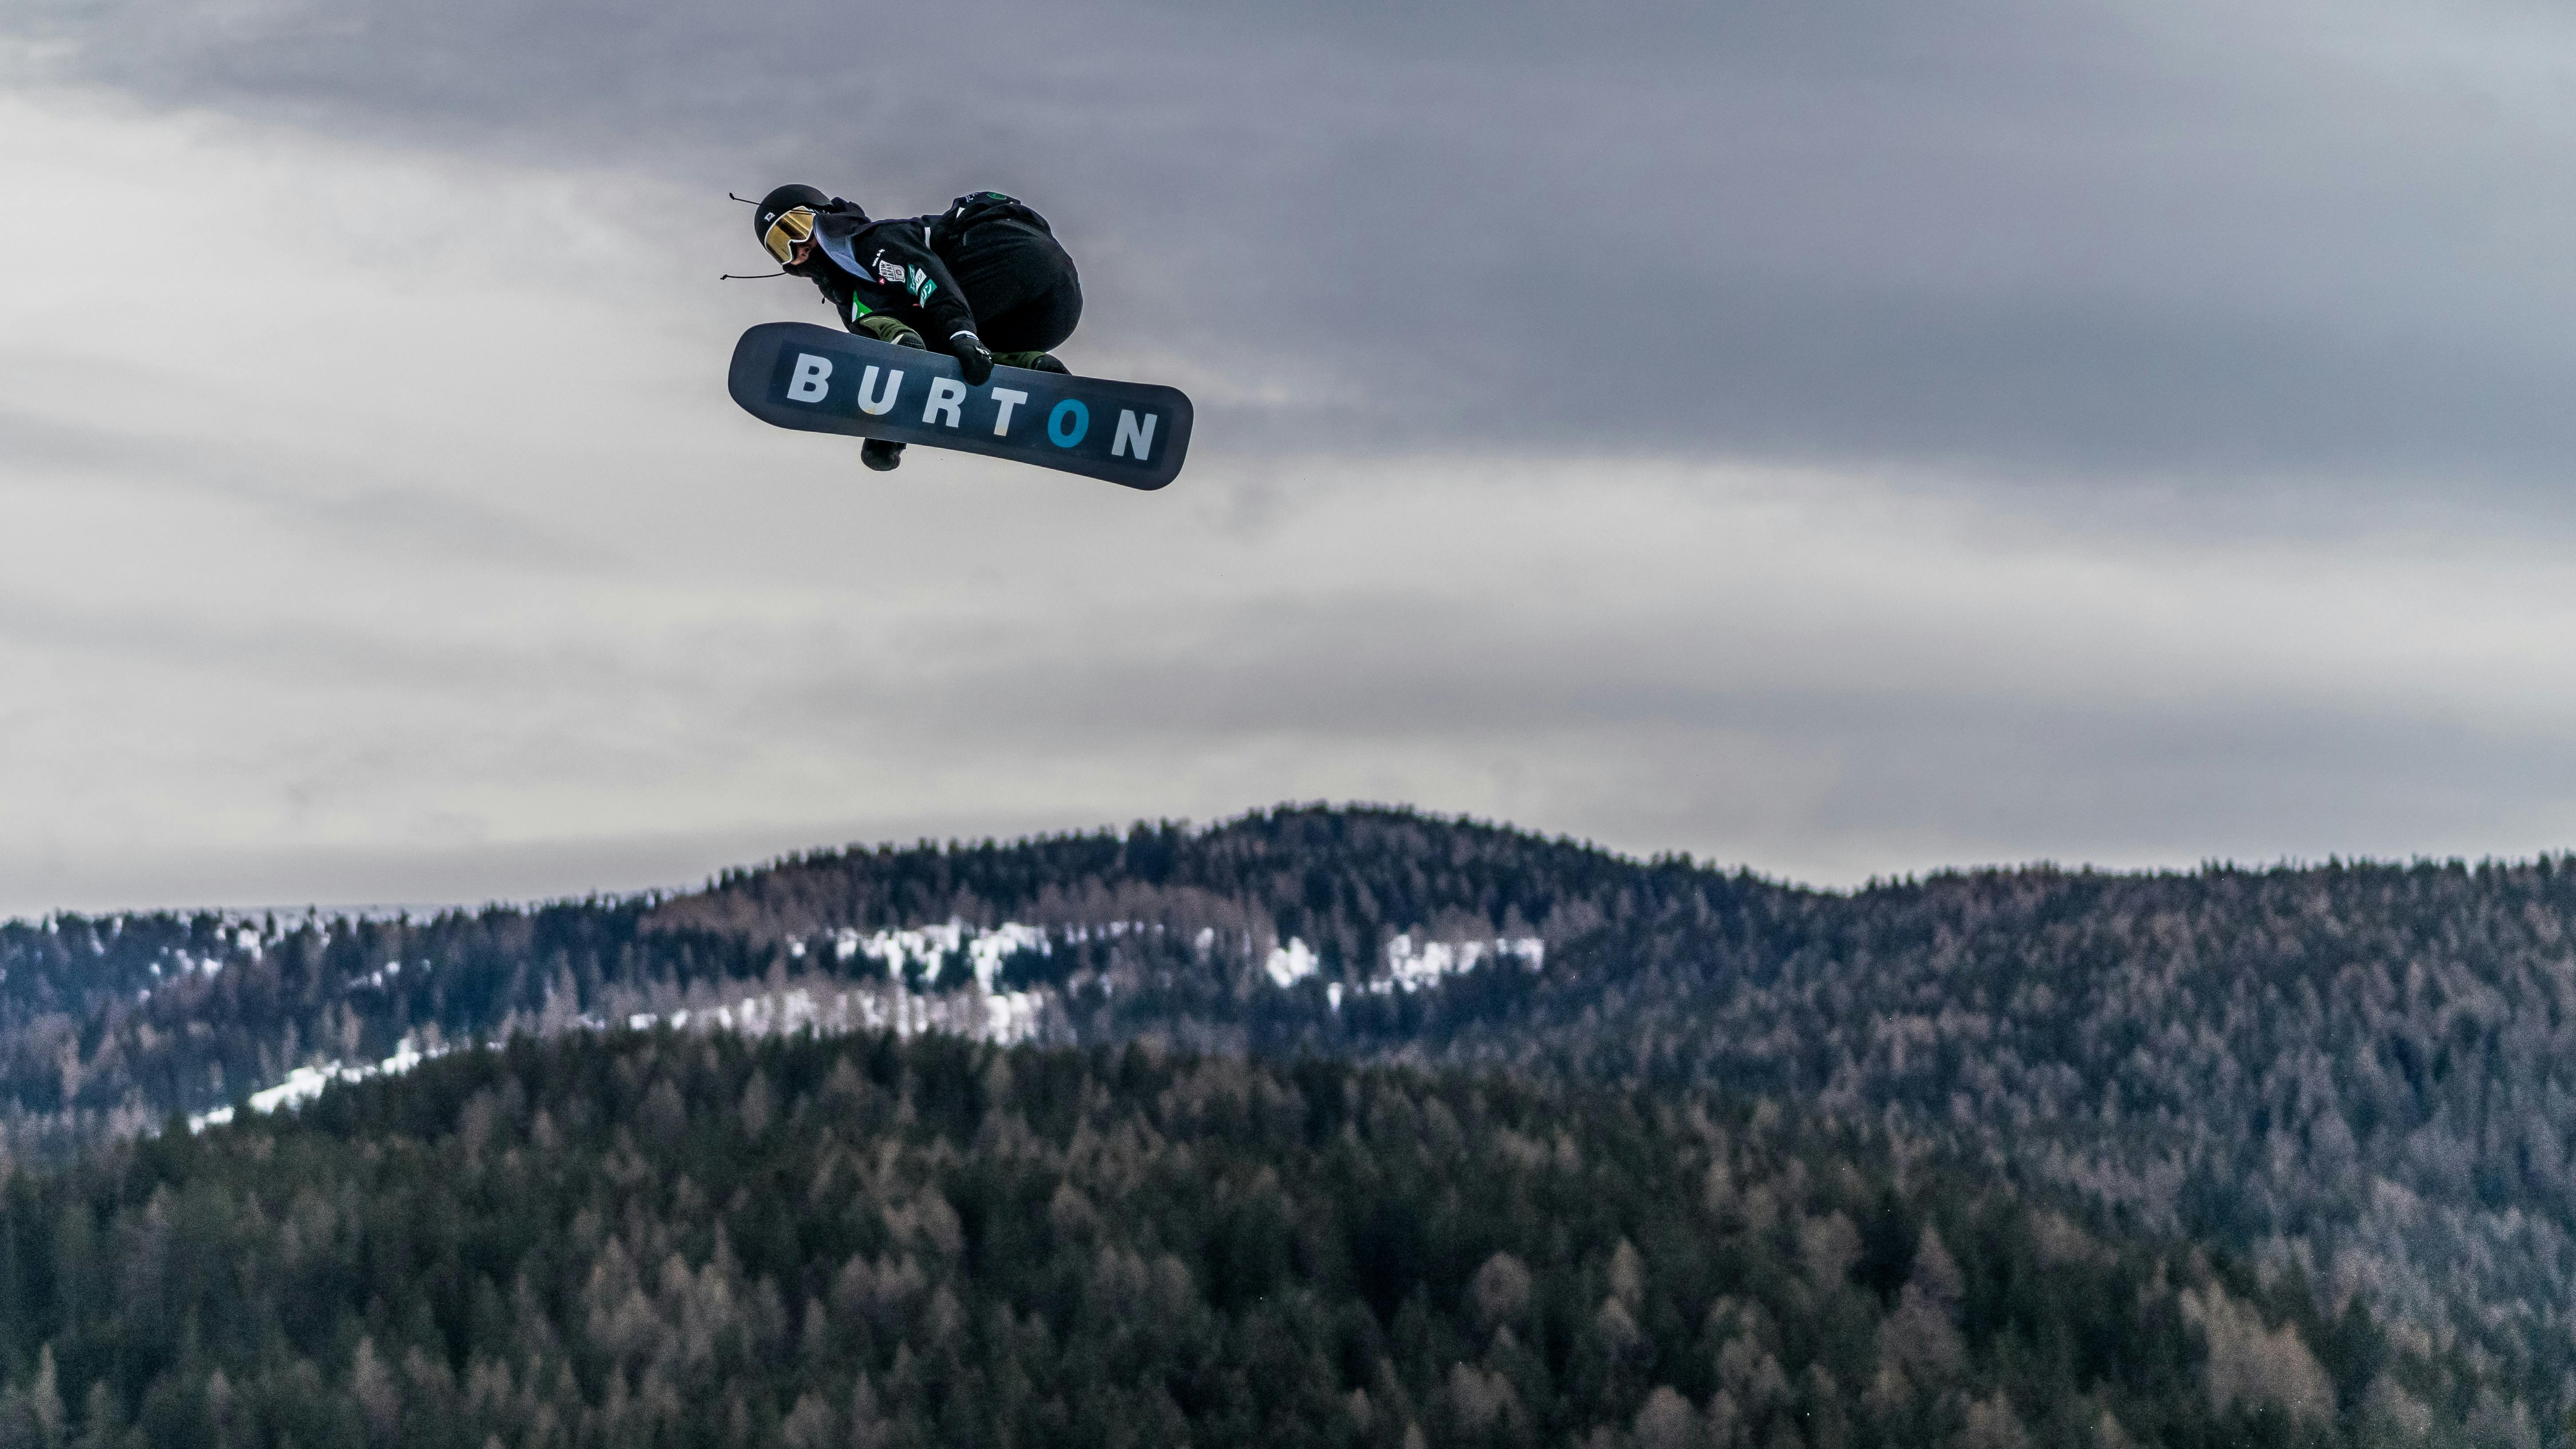 A snowboarder flies through the air with mountains in the background